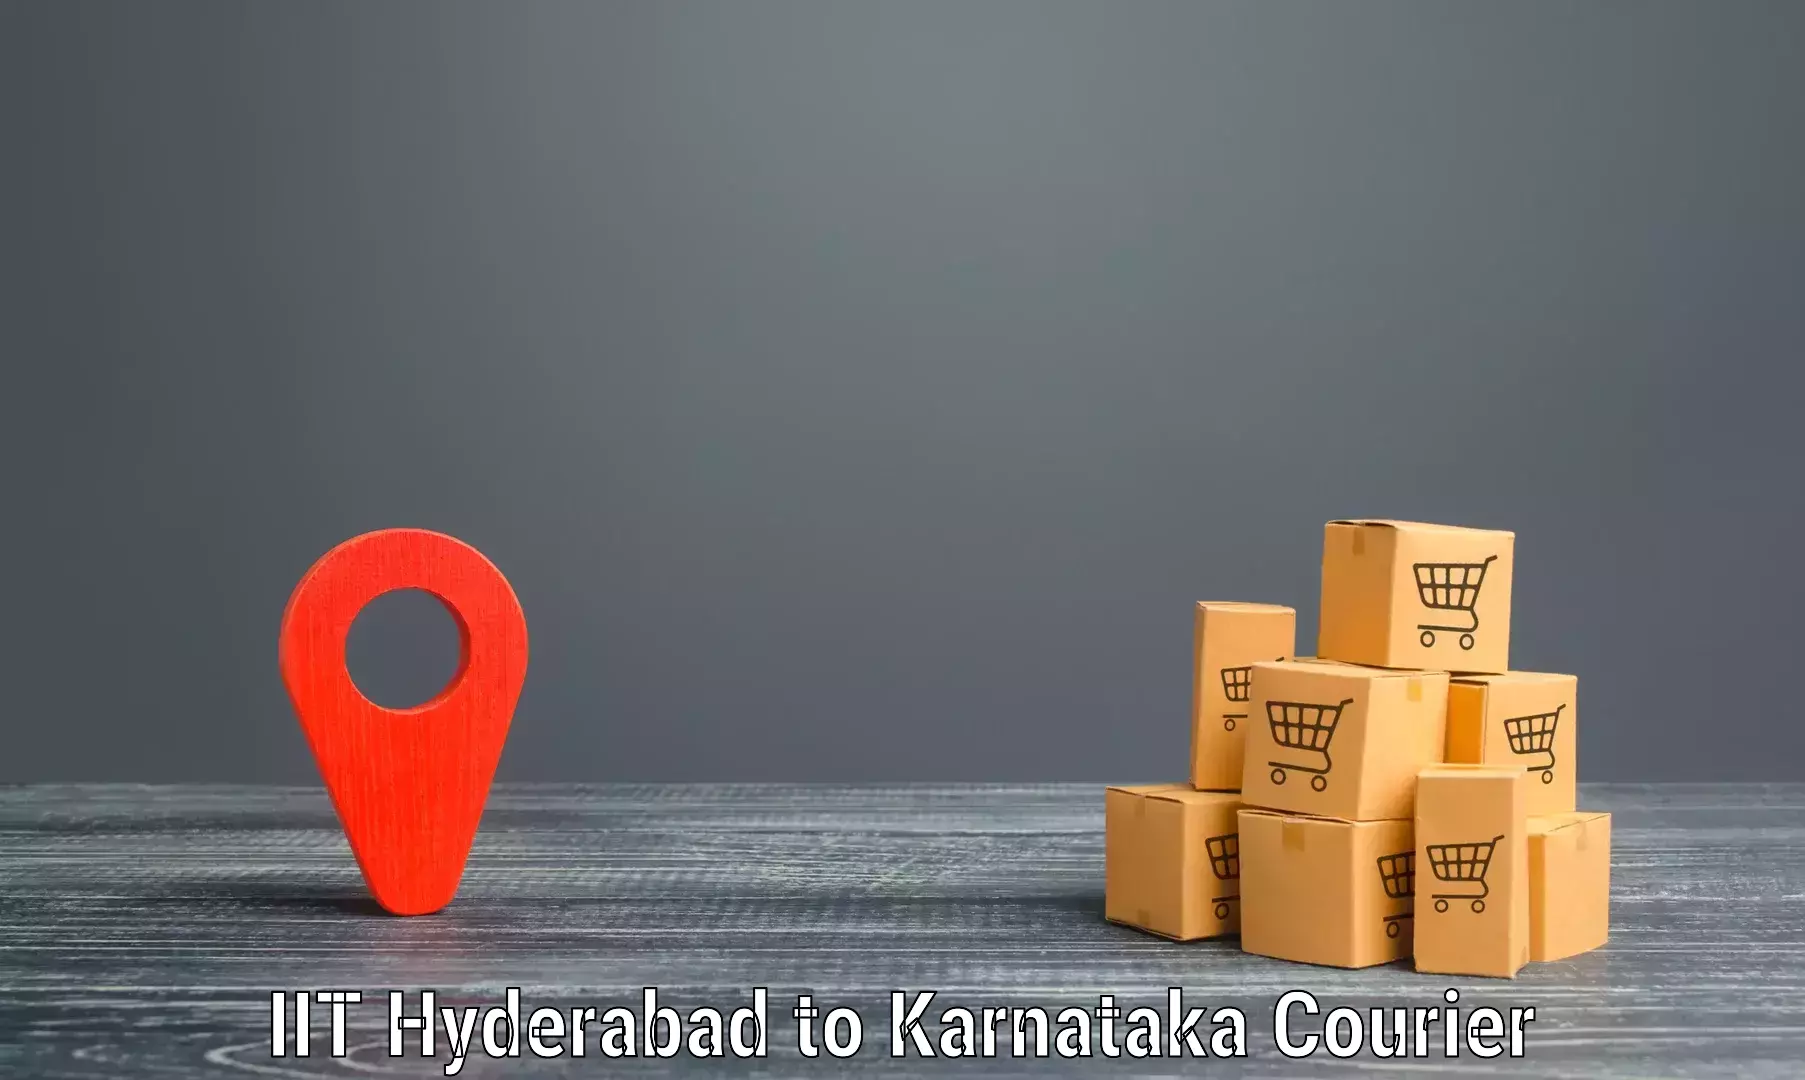 User-friendly delivery service IIT Hyderabad to Mangalore